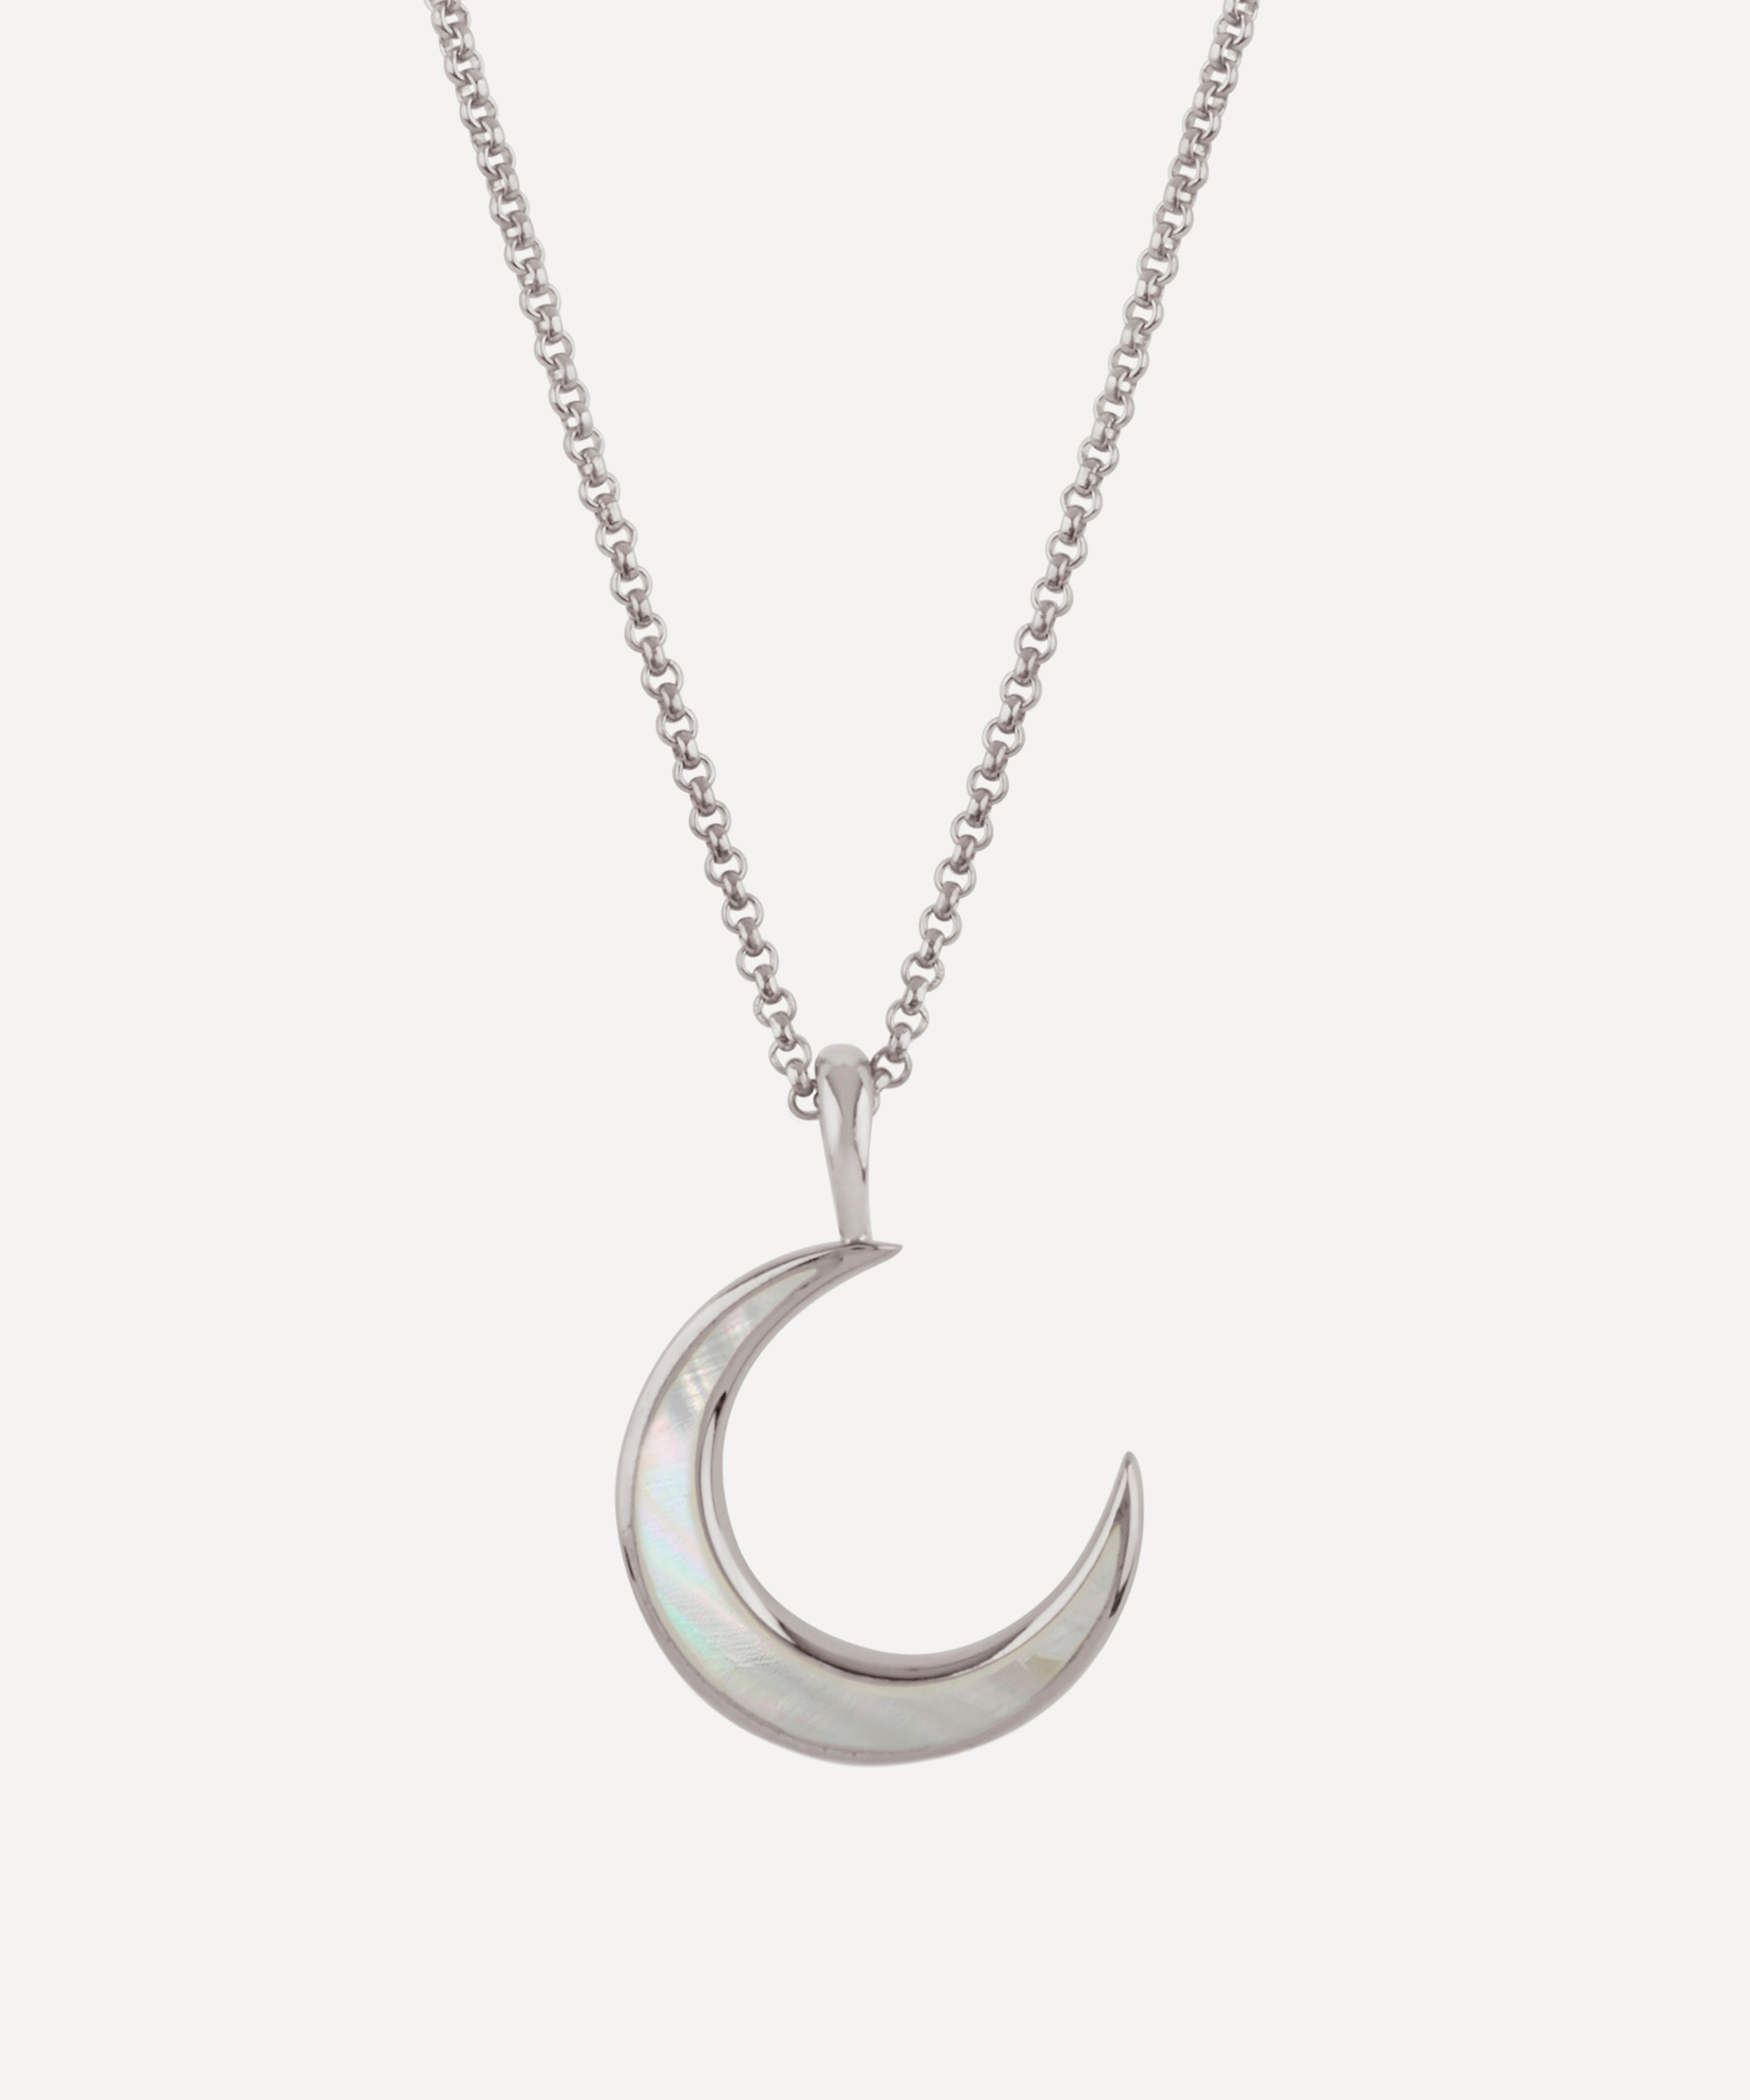 Dinny Hall - Silver Mother of Pearl Moon Charm Pendant Necklace